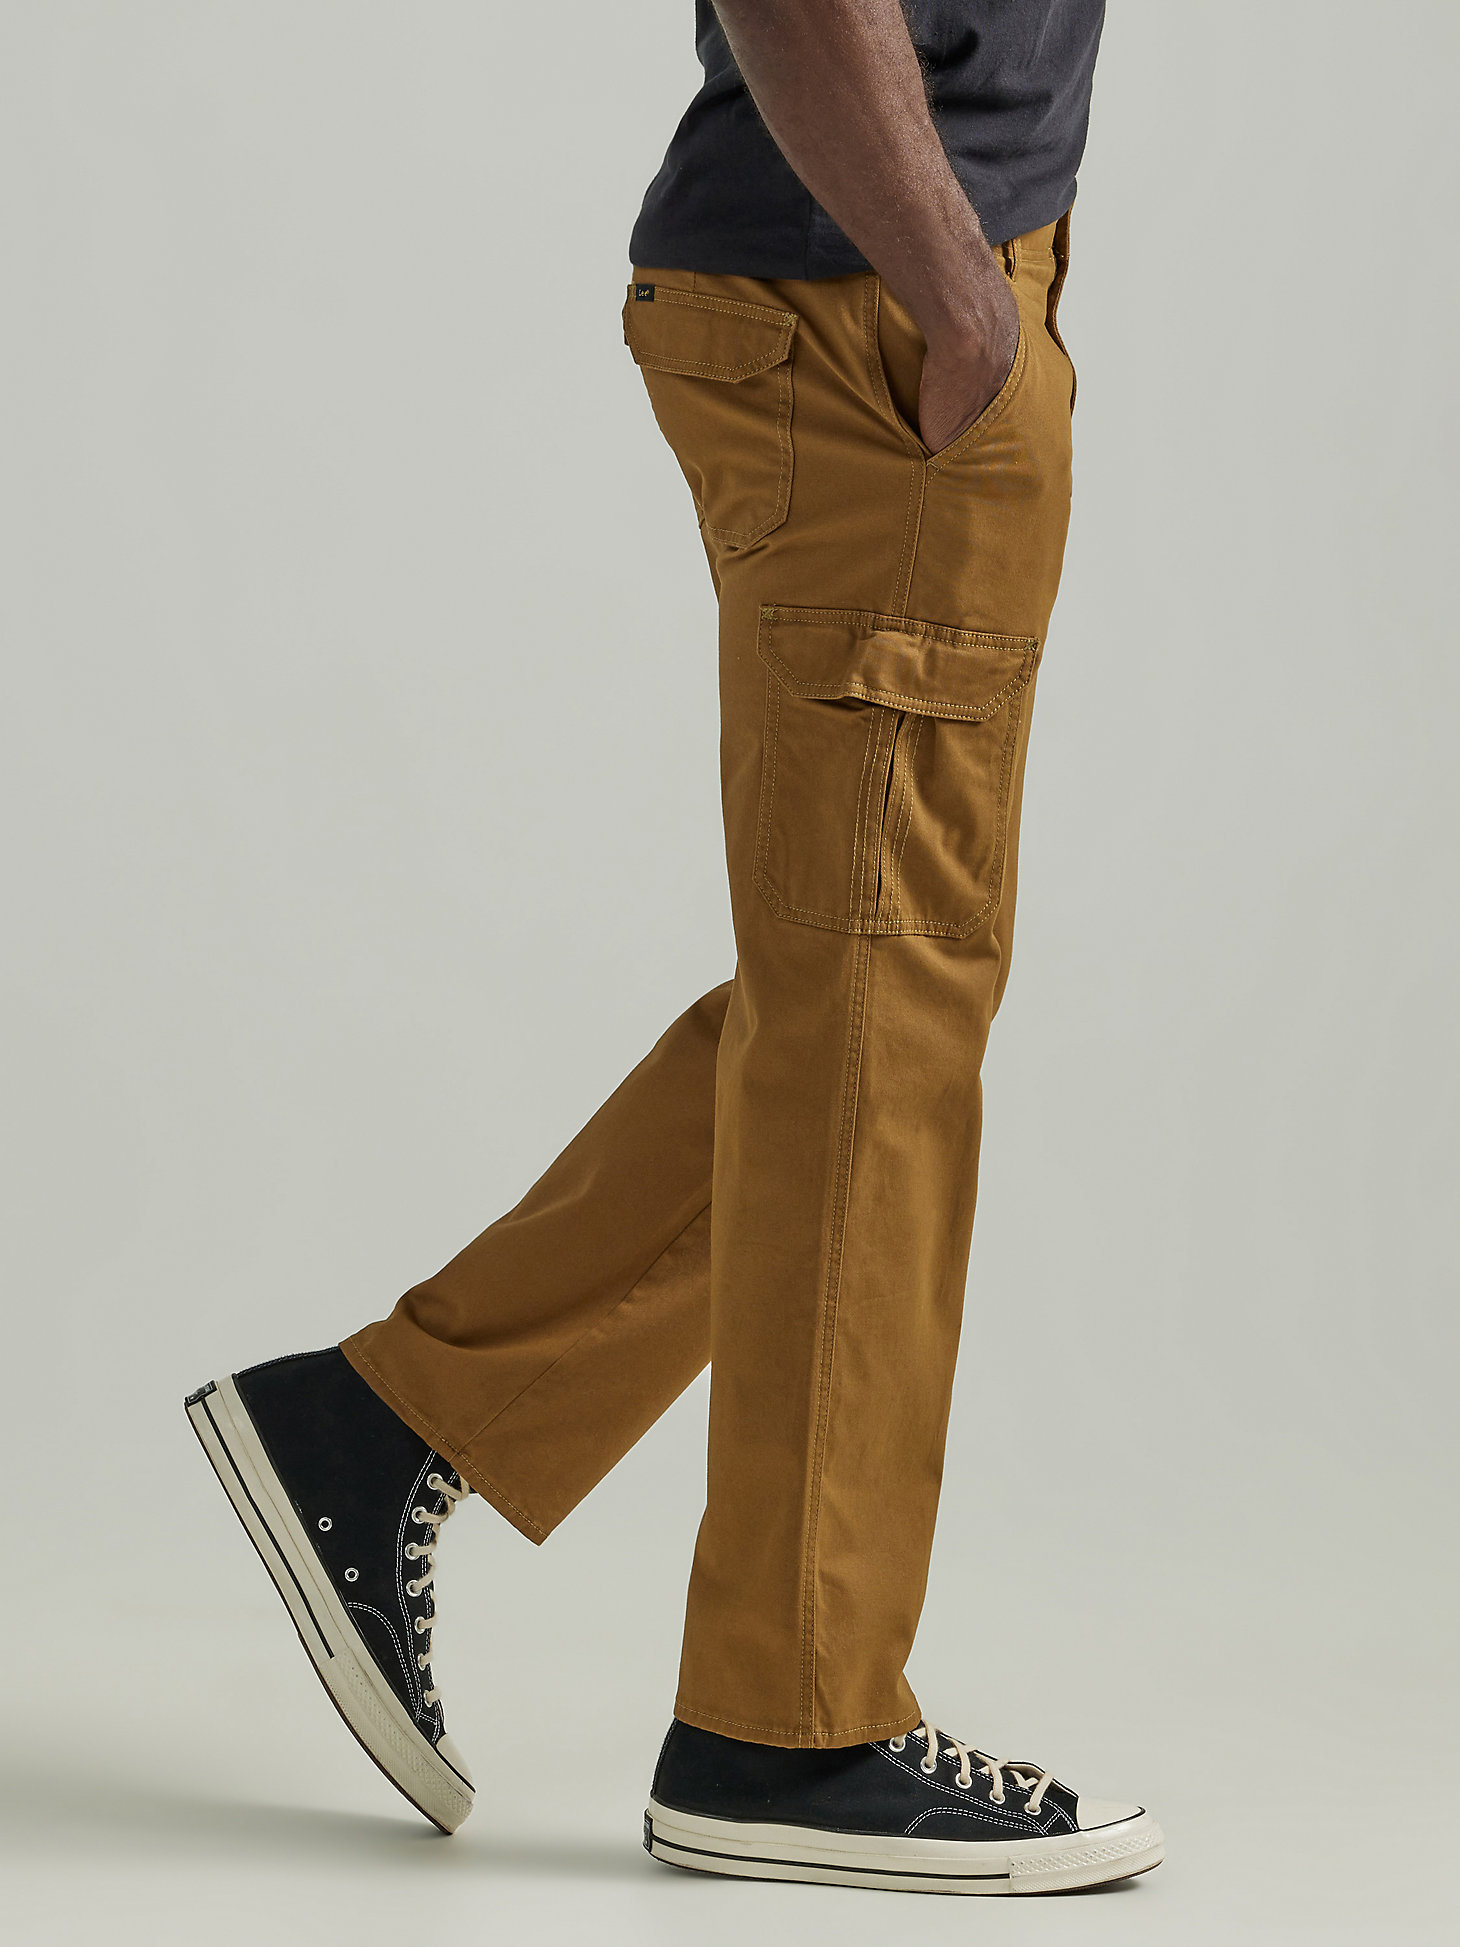 Men's Extreme Comfort Cargo Twill Pant in Tumbleweed alternative view 3